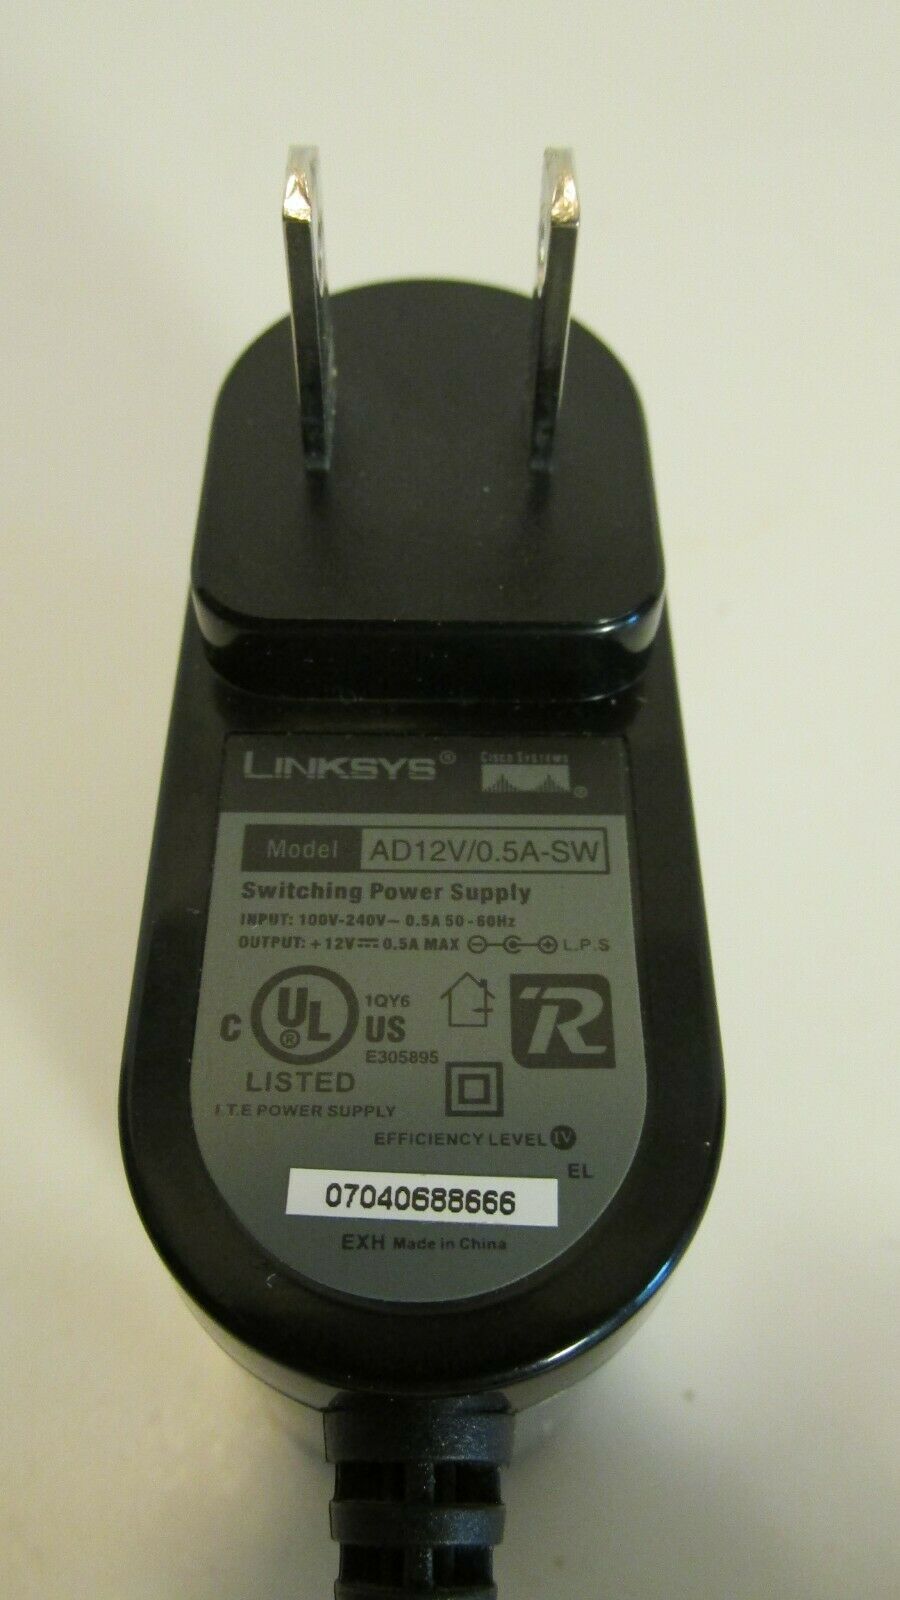 Linksys AD12V0.5A-SW Power Supply AC Adapter Charger DC 12V 0.5A TESTED Brand: Linksys Type: AC/DC Adapter Model: AD12V